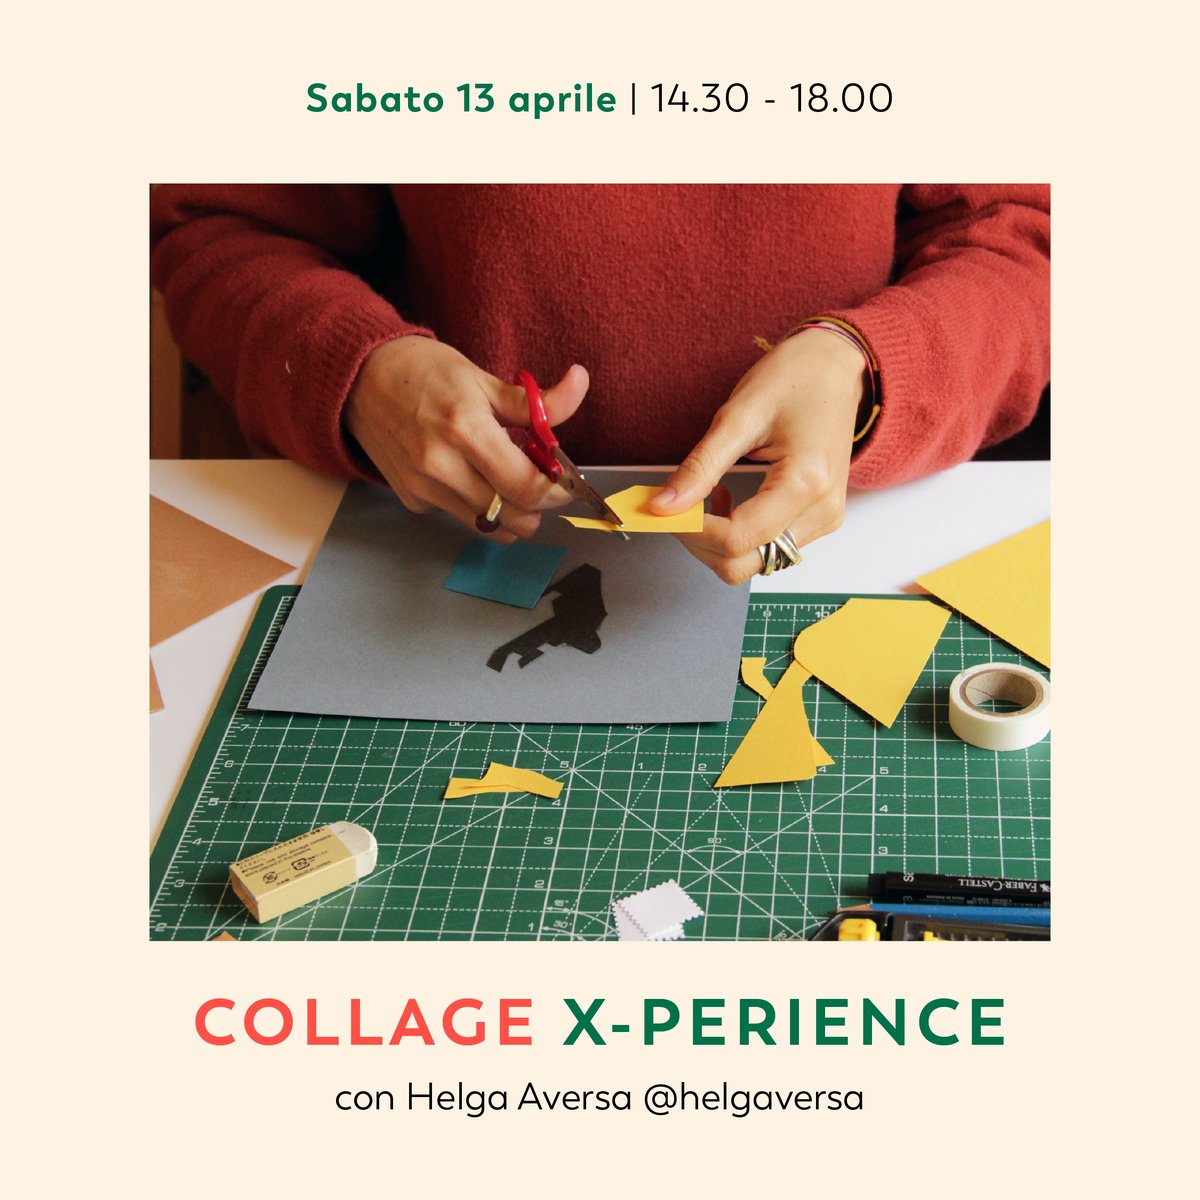 Image of Collage X-perience